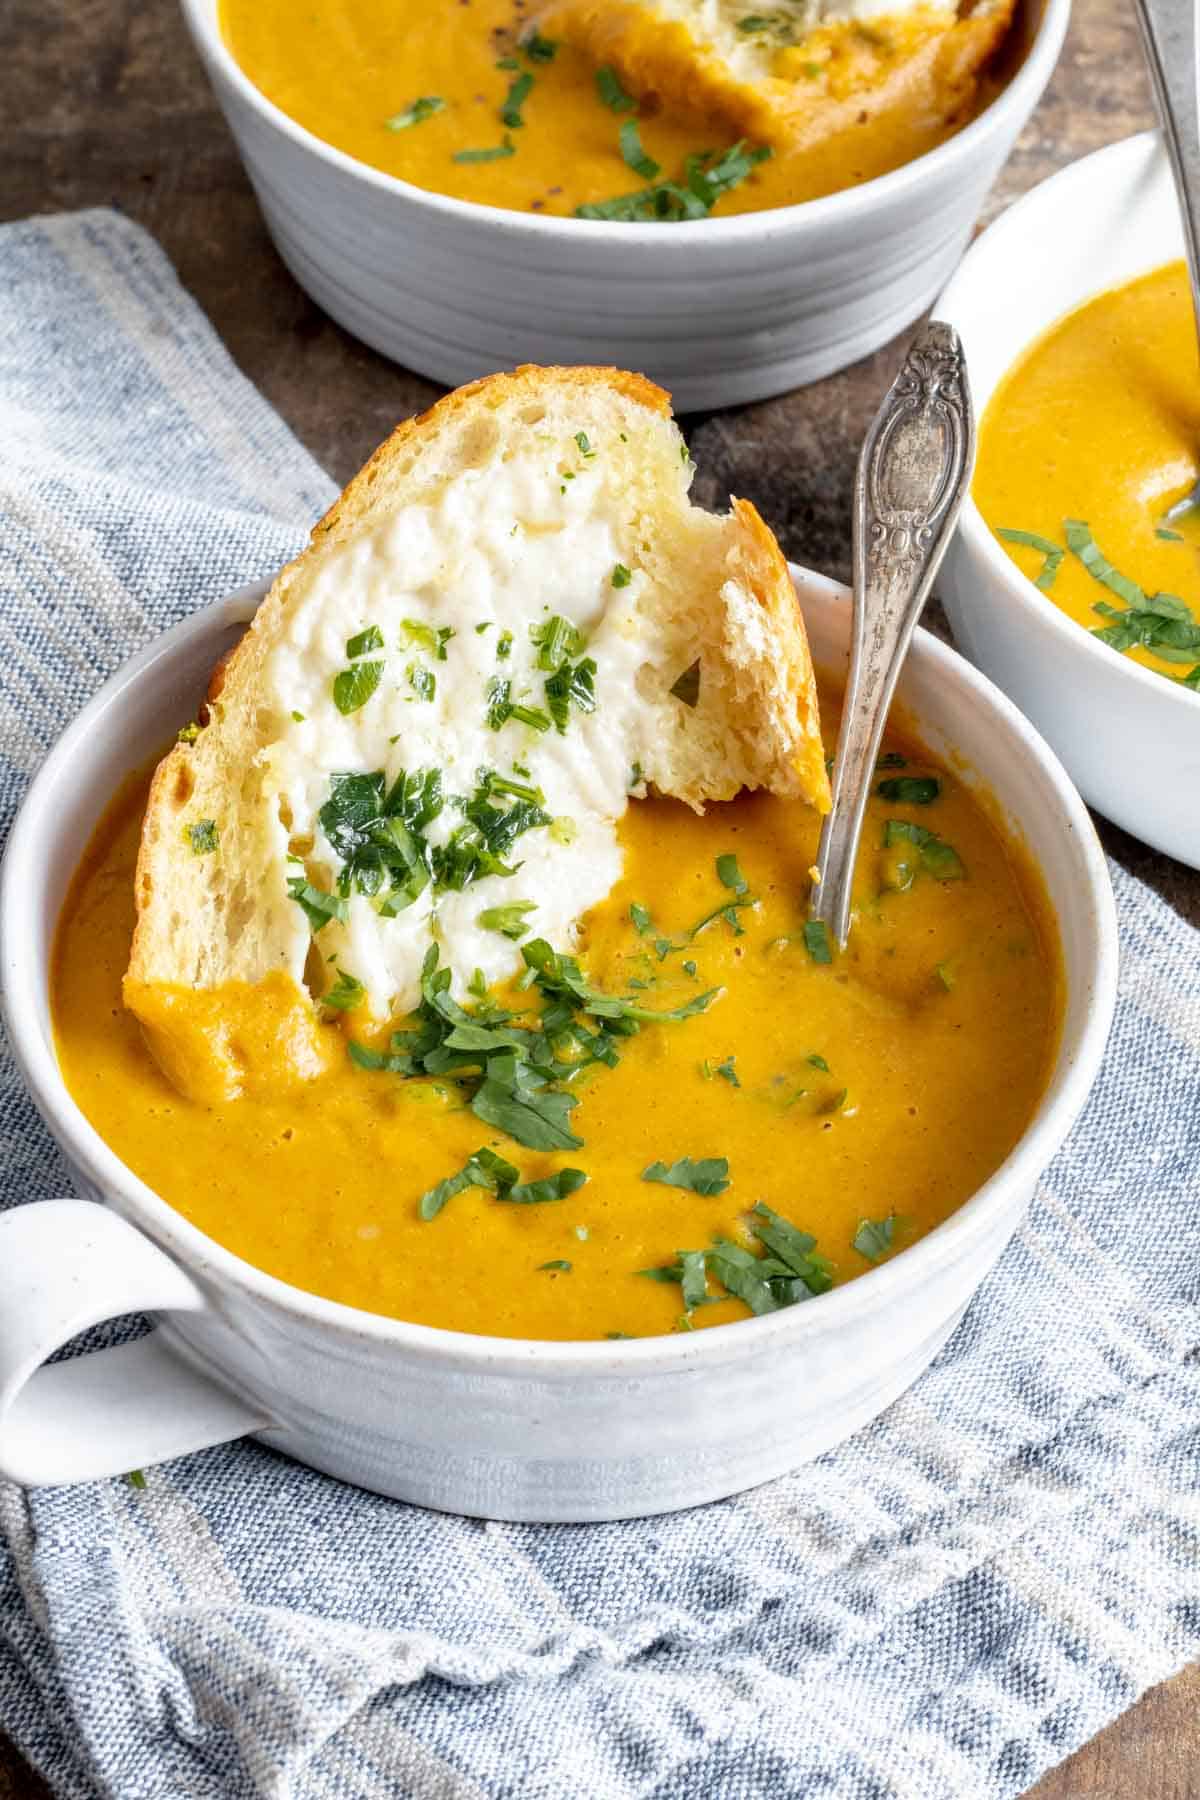 Pumpkin soup in bowl garnished with parsley and garlic bread dipped in.